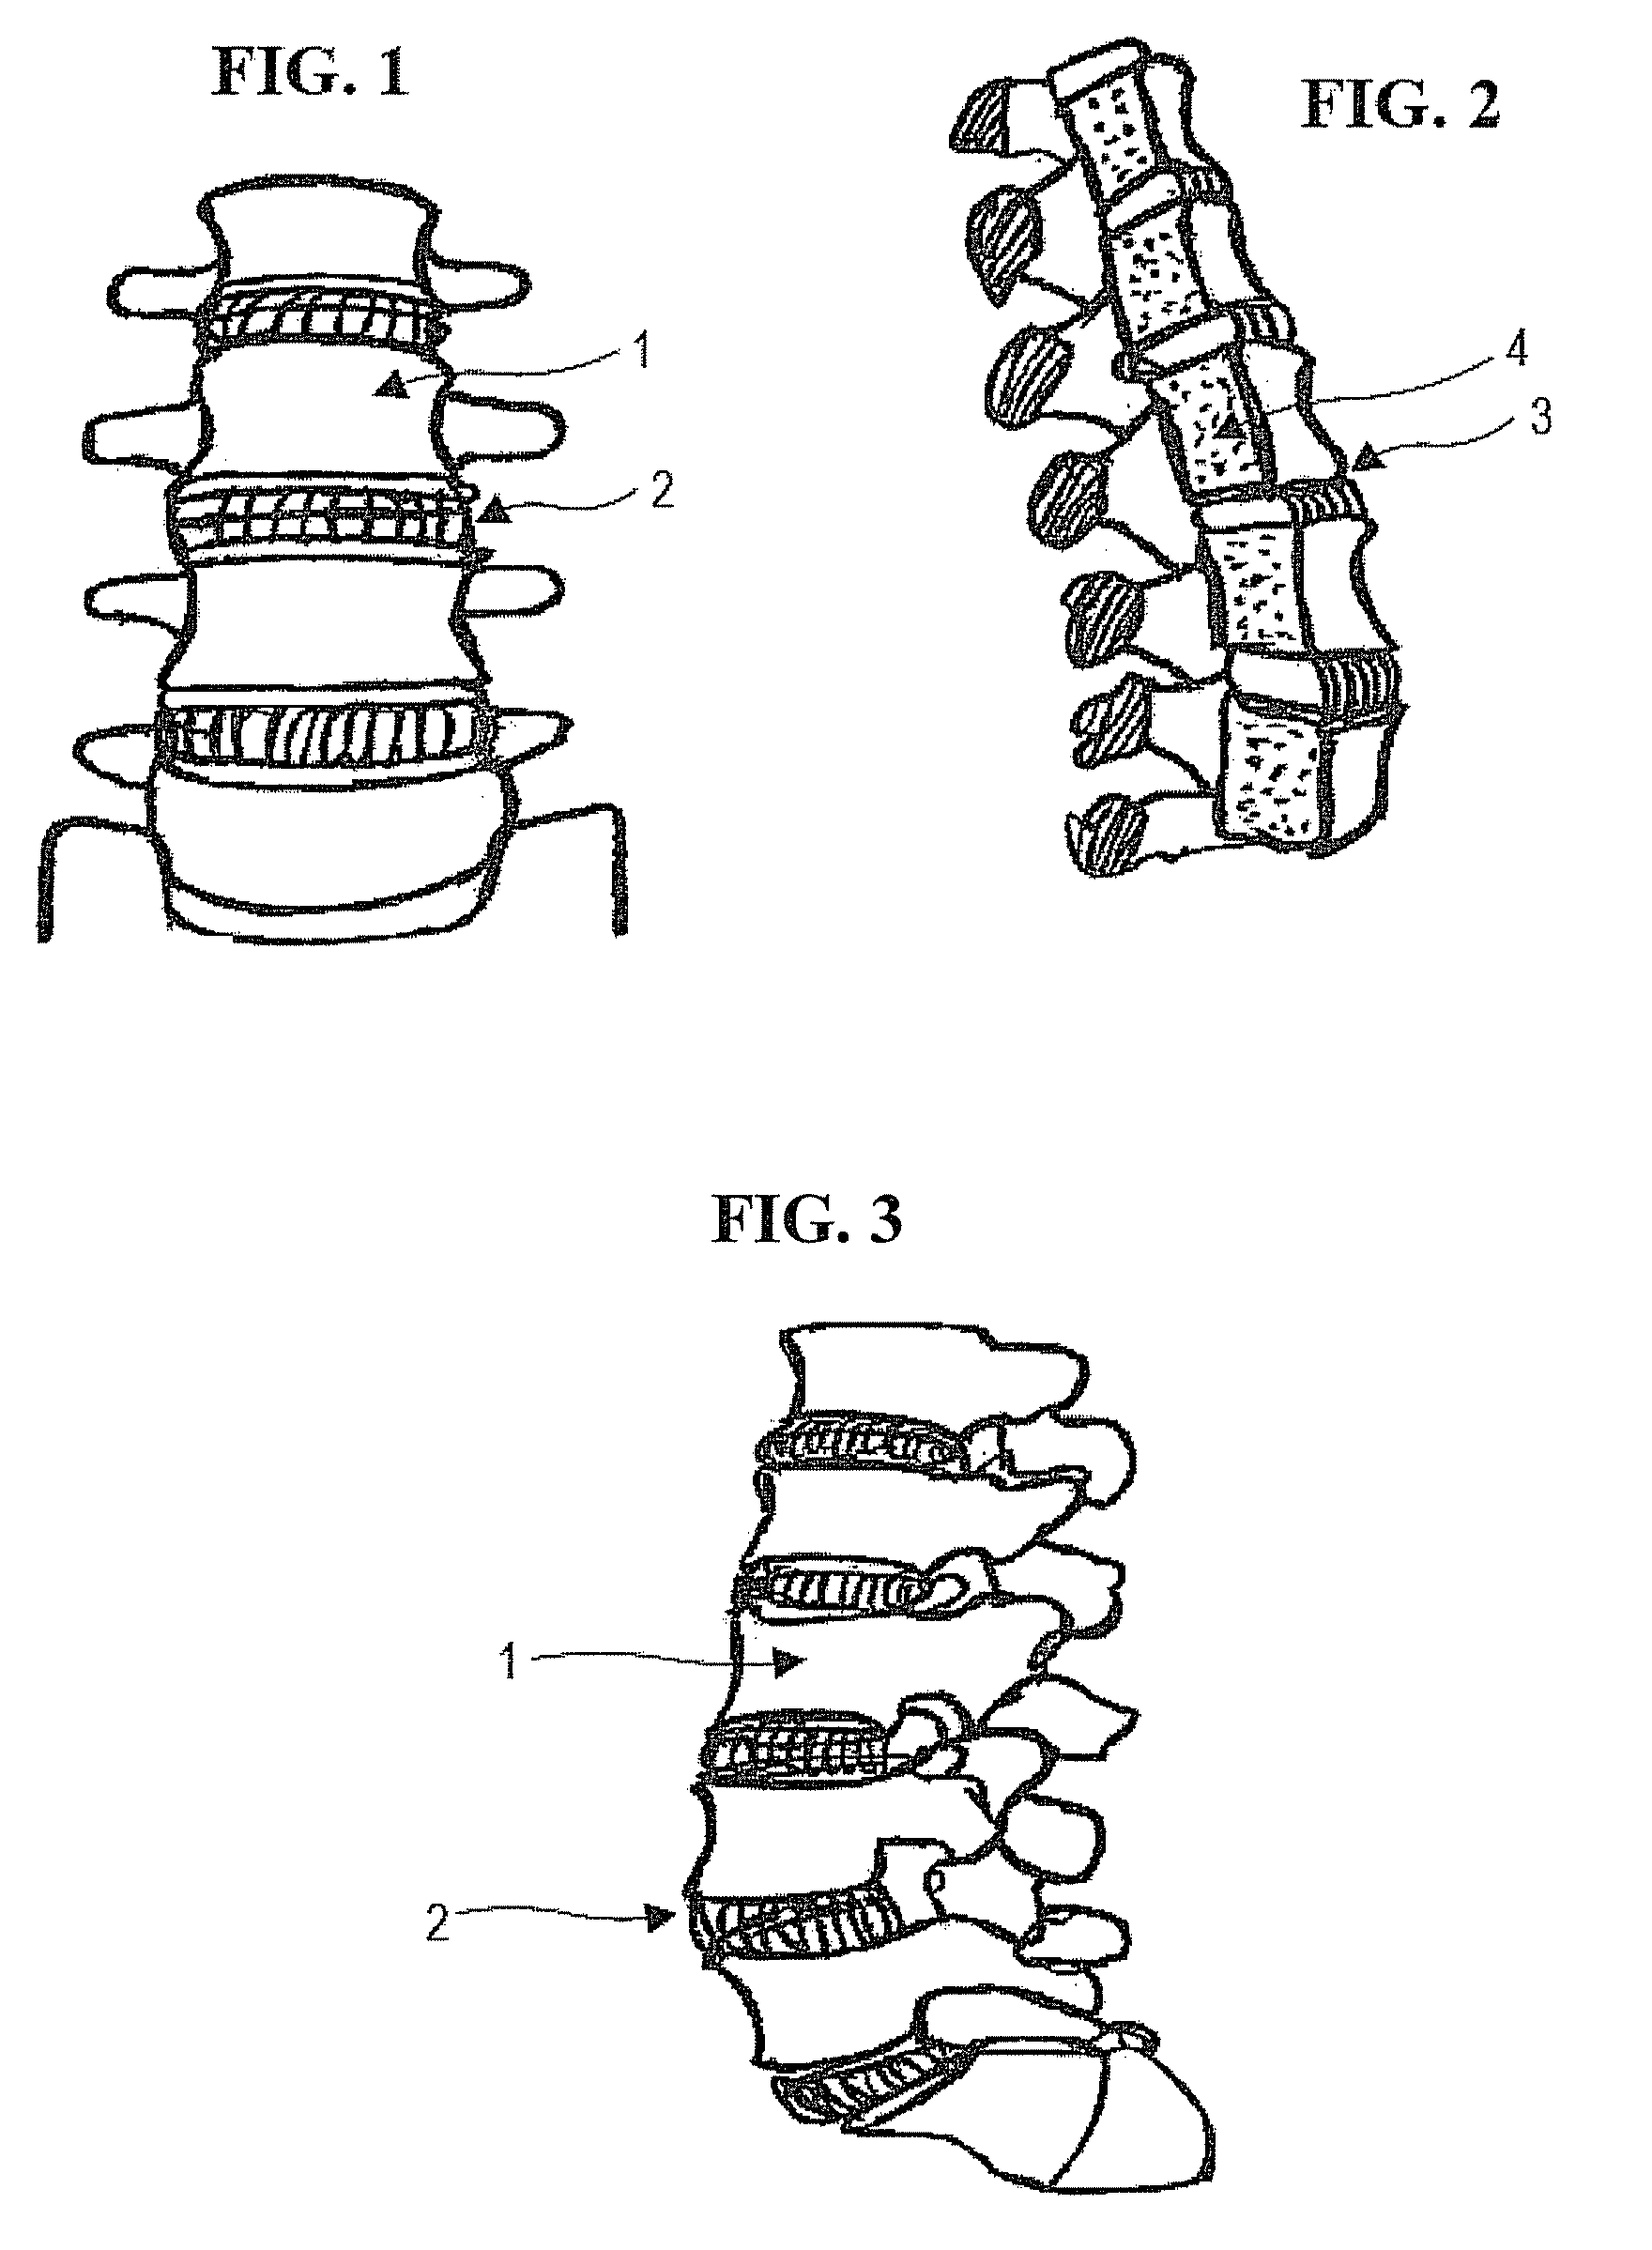 Apparatus for anterior intervertebral spinal fixation and fusion